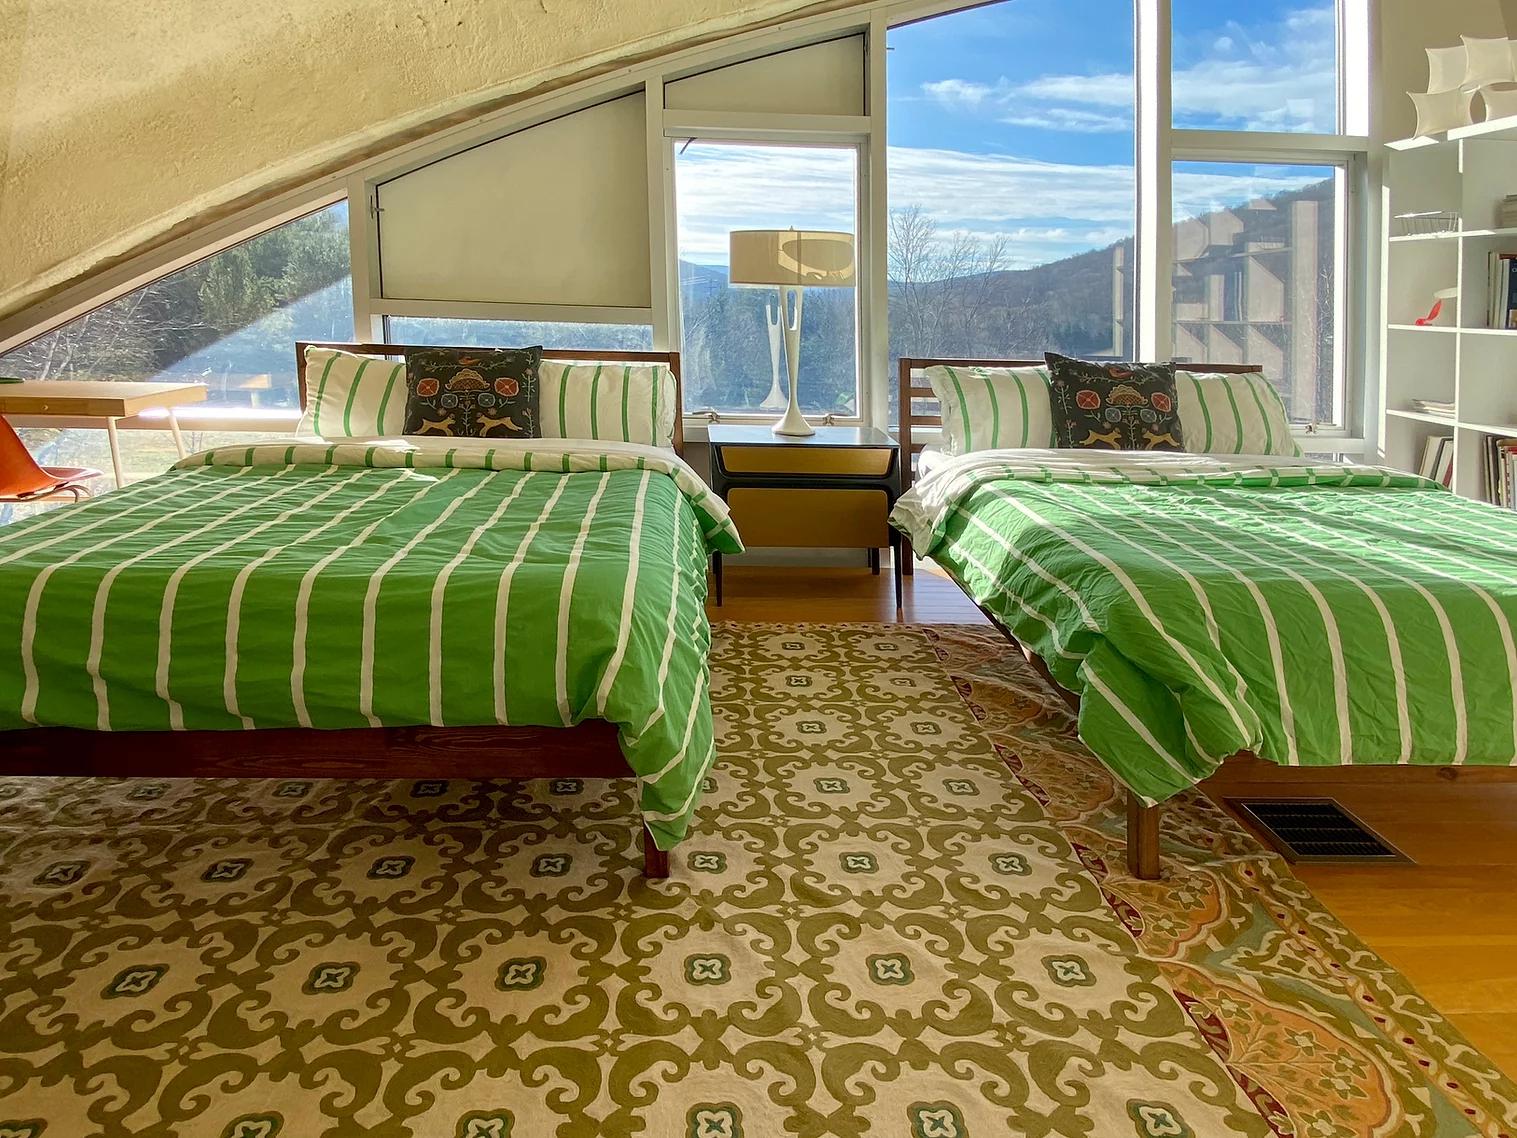 Guest Room with Moutain Views.